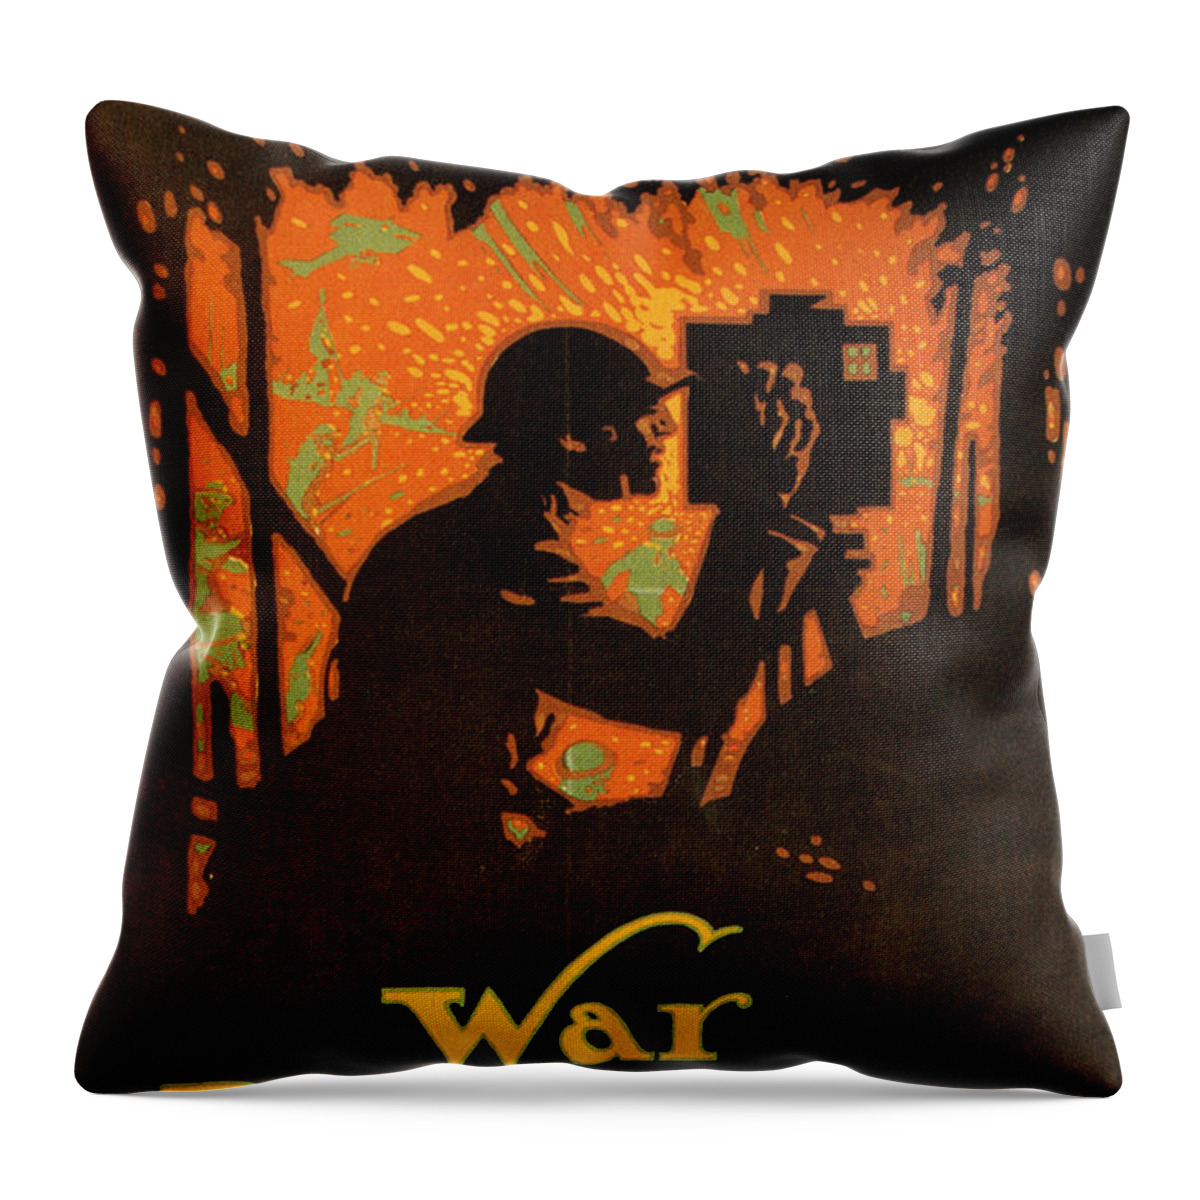 1917 Throw Pillow featuring the drawing War Pictures Poster, 1917 by Louis Fancher